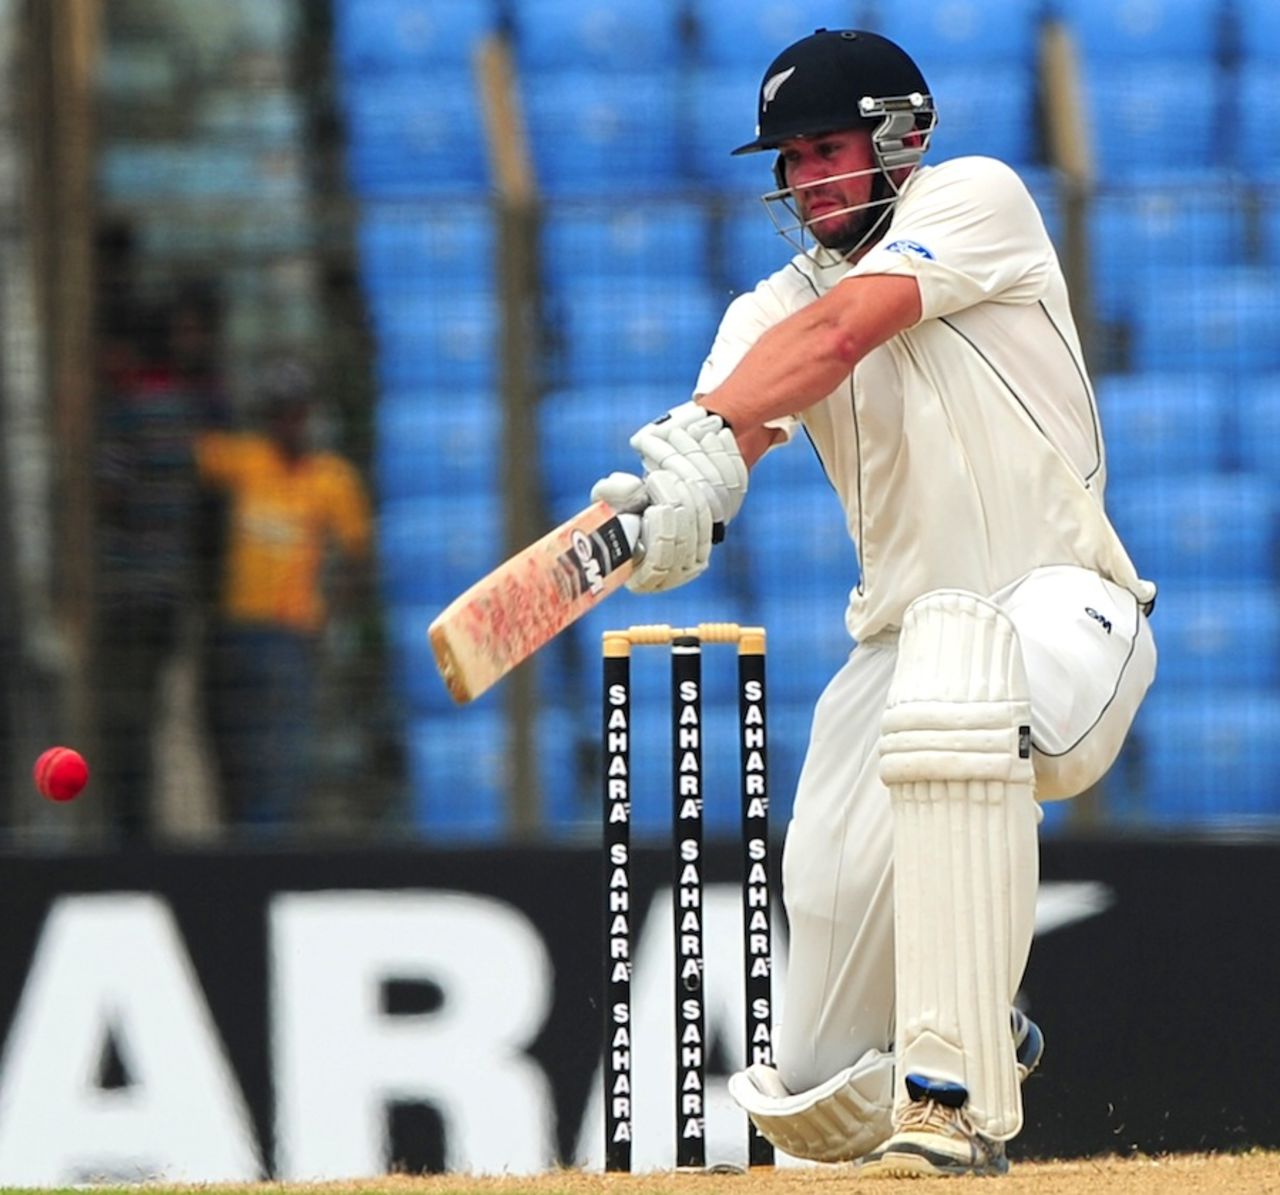 Peter Fulton drives en route to his half-century, Bangladesh v New Zealand, 1st Test, Chittagong, day 1, October 9, 2013